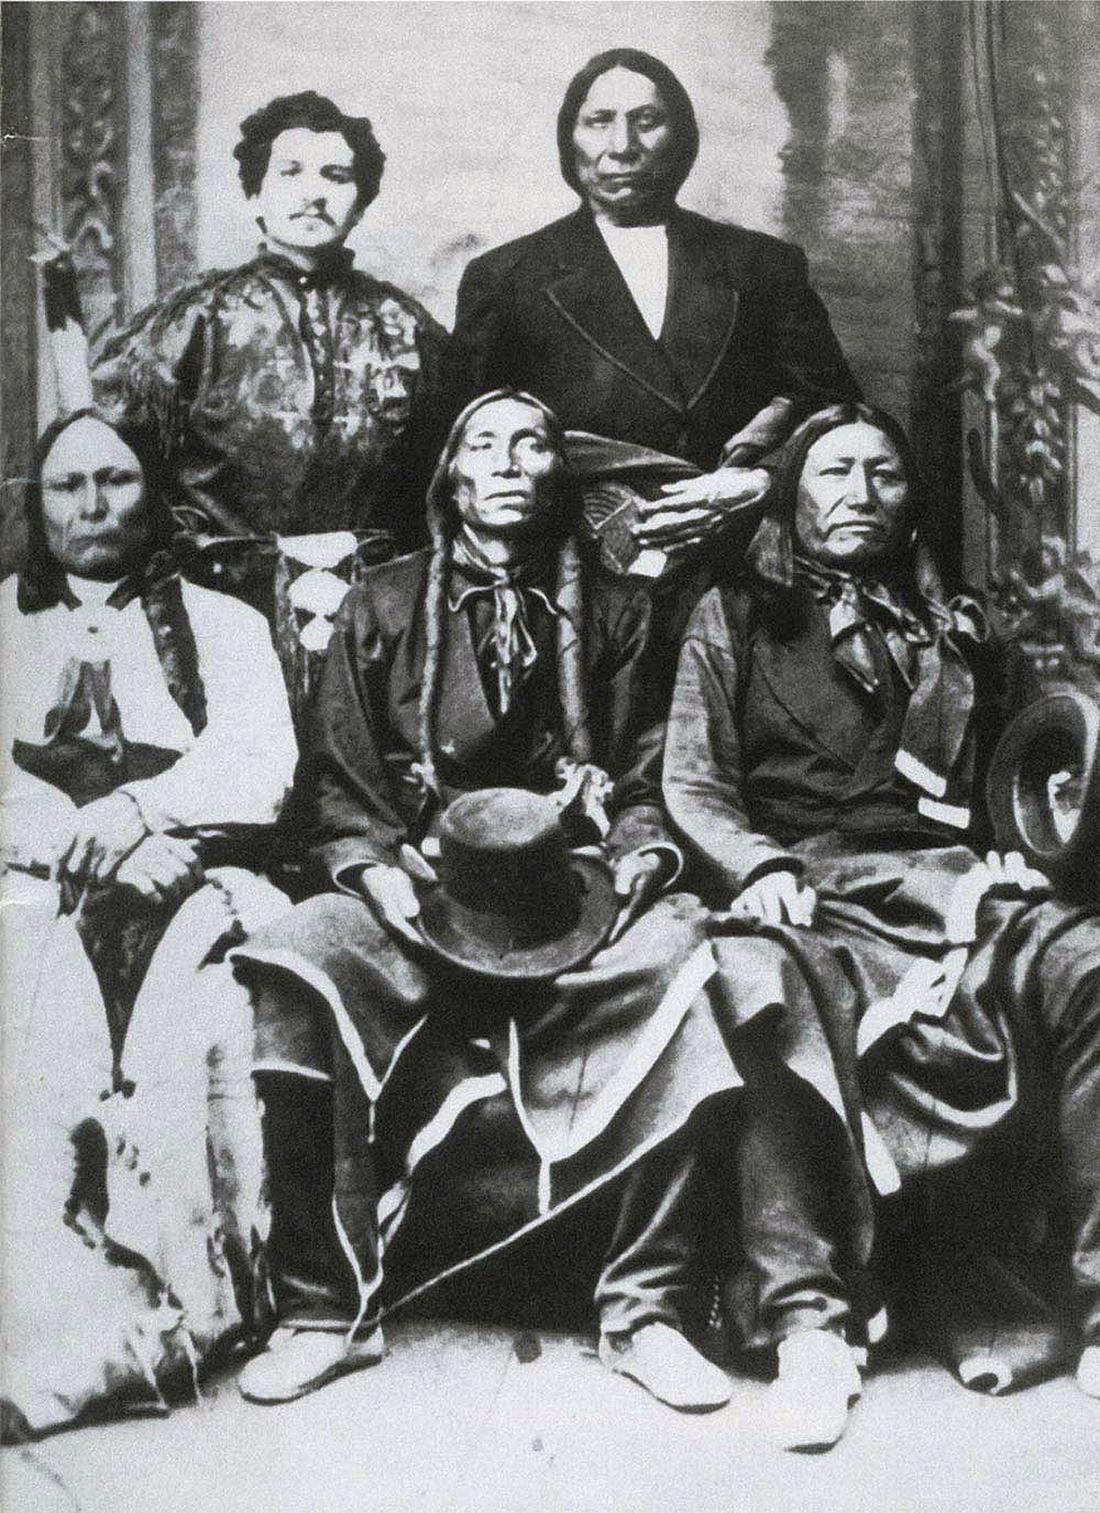 Three seated Pawnee chiefs in traditional clothing, with Mayer and another chief in a western style suit standing behind them, 